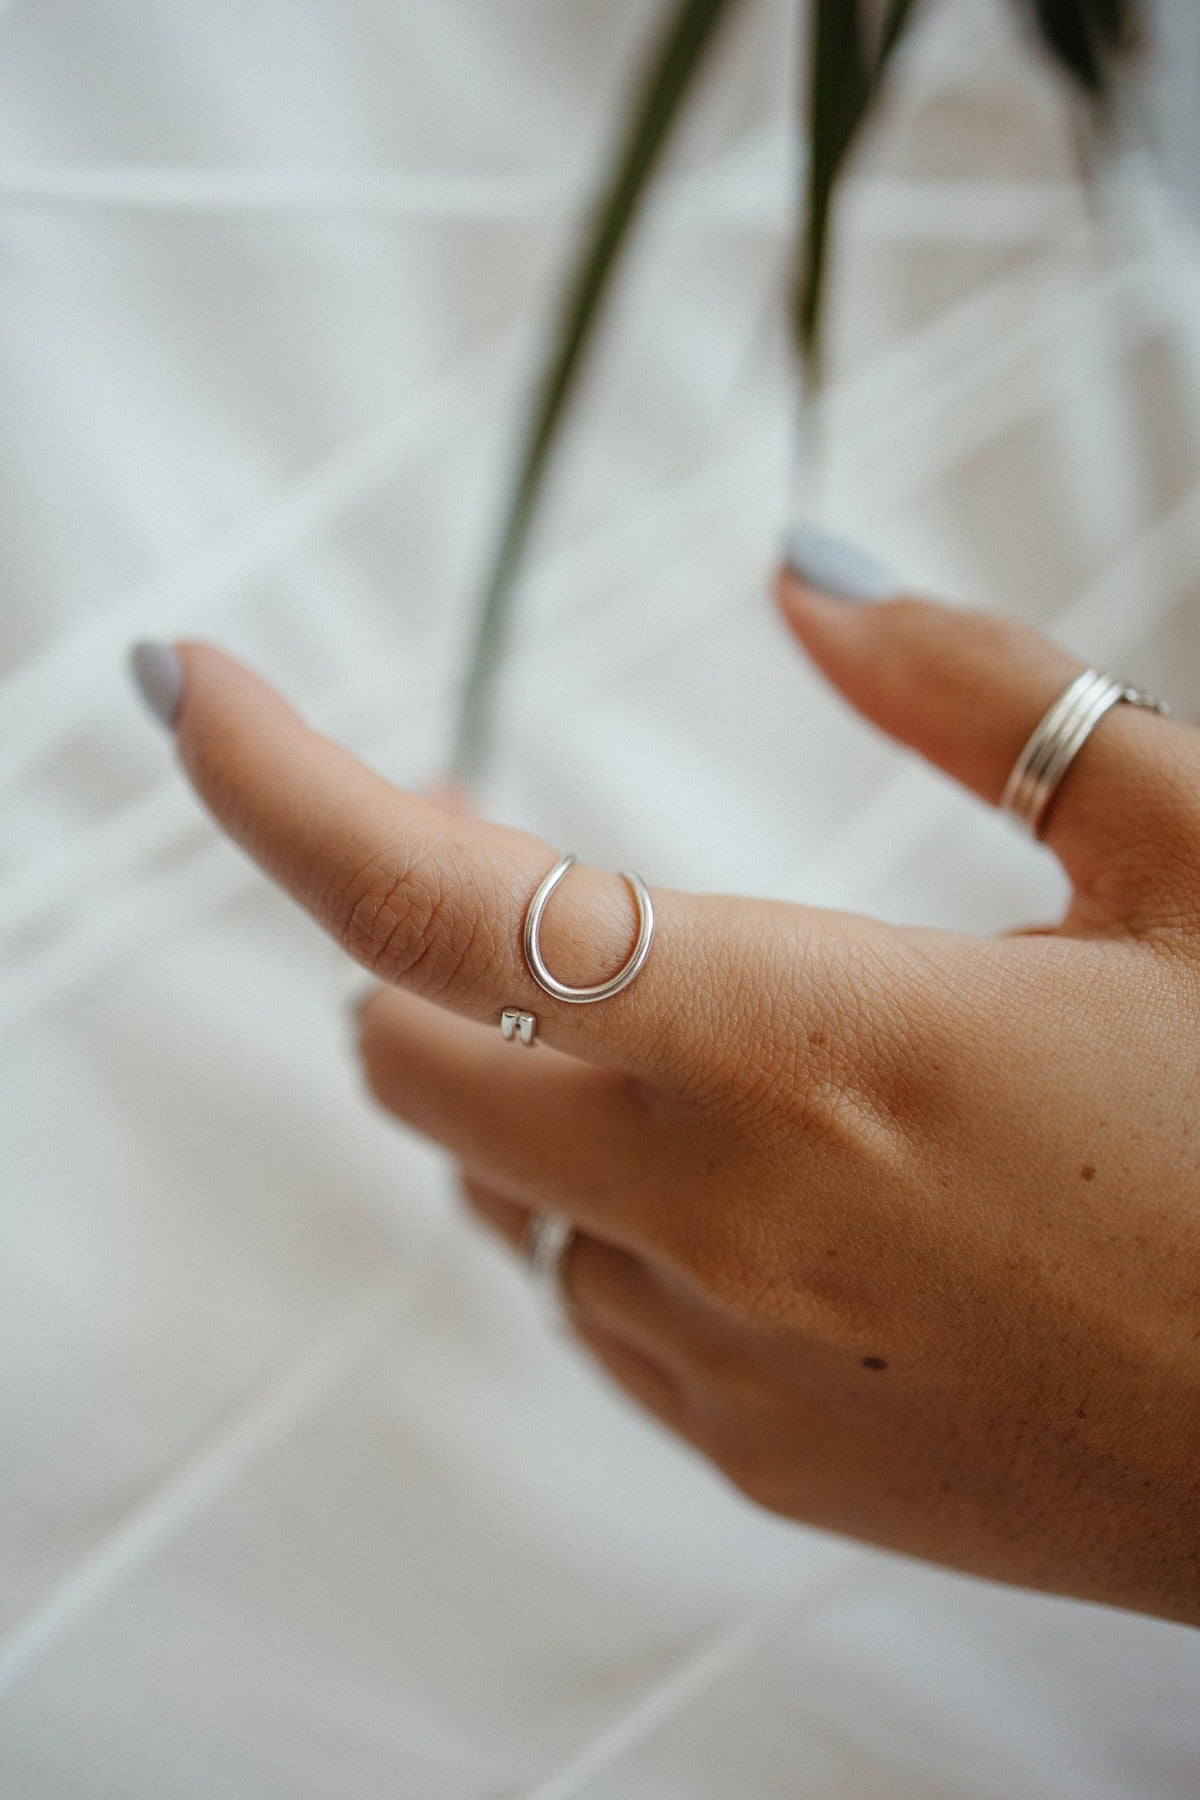 Silver tear drop wrap around ring band